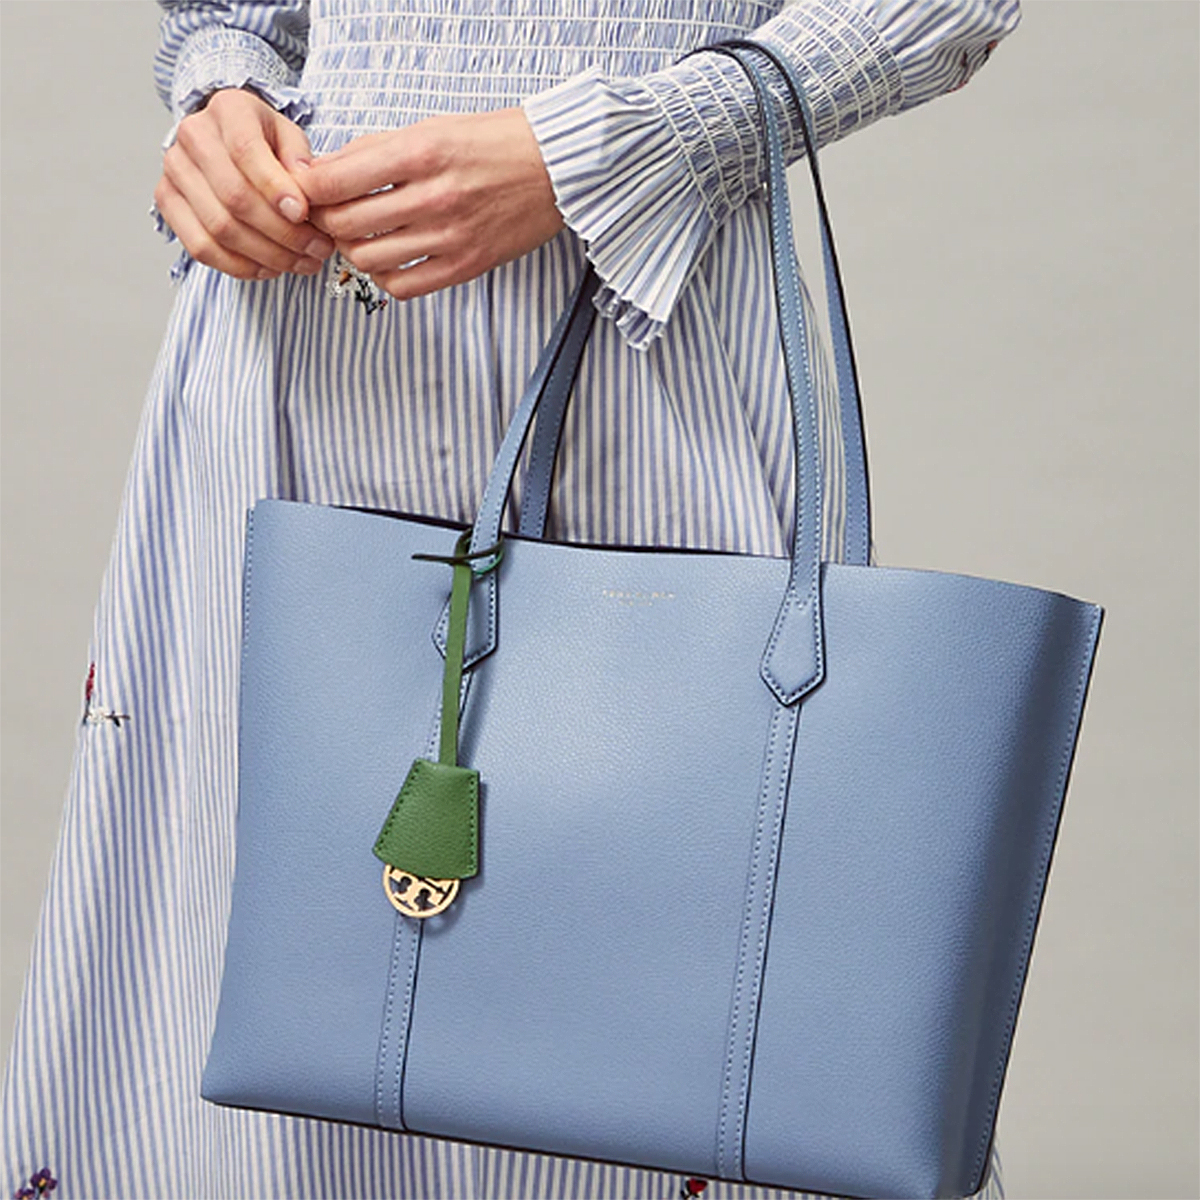 Tory Burch Bags: 15 Picks From the Semi-Annual Sale Up to 62% Off